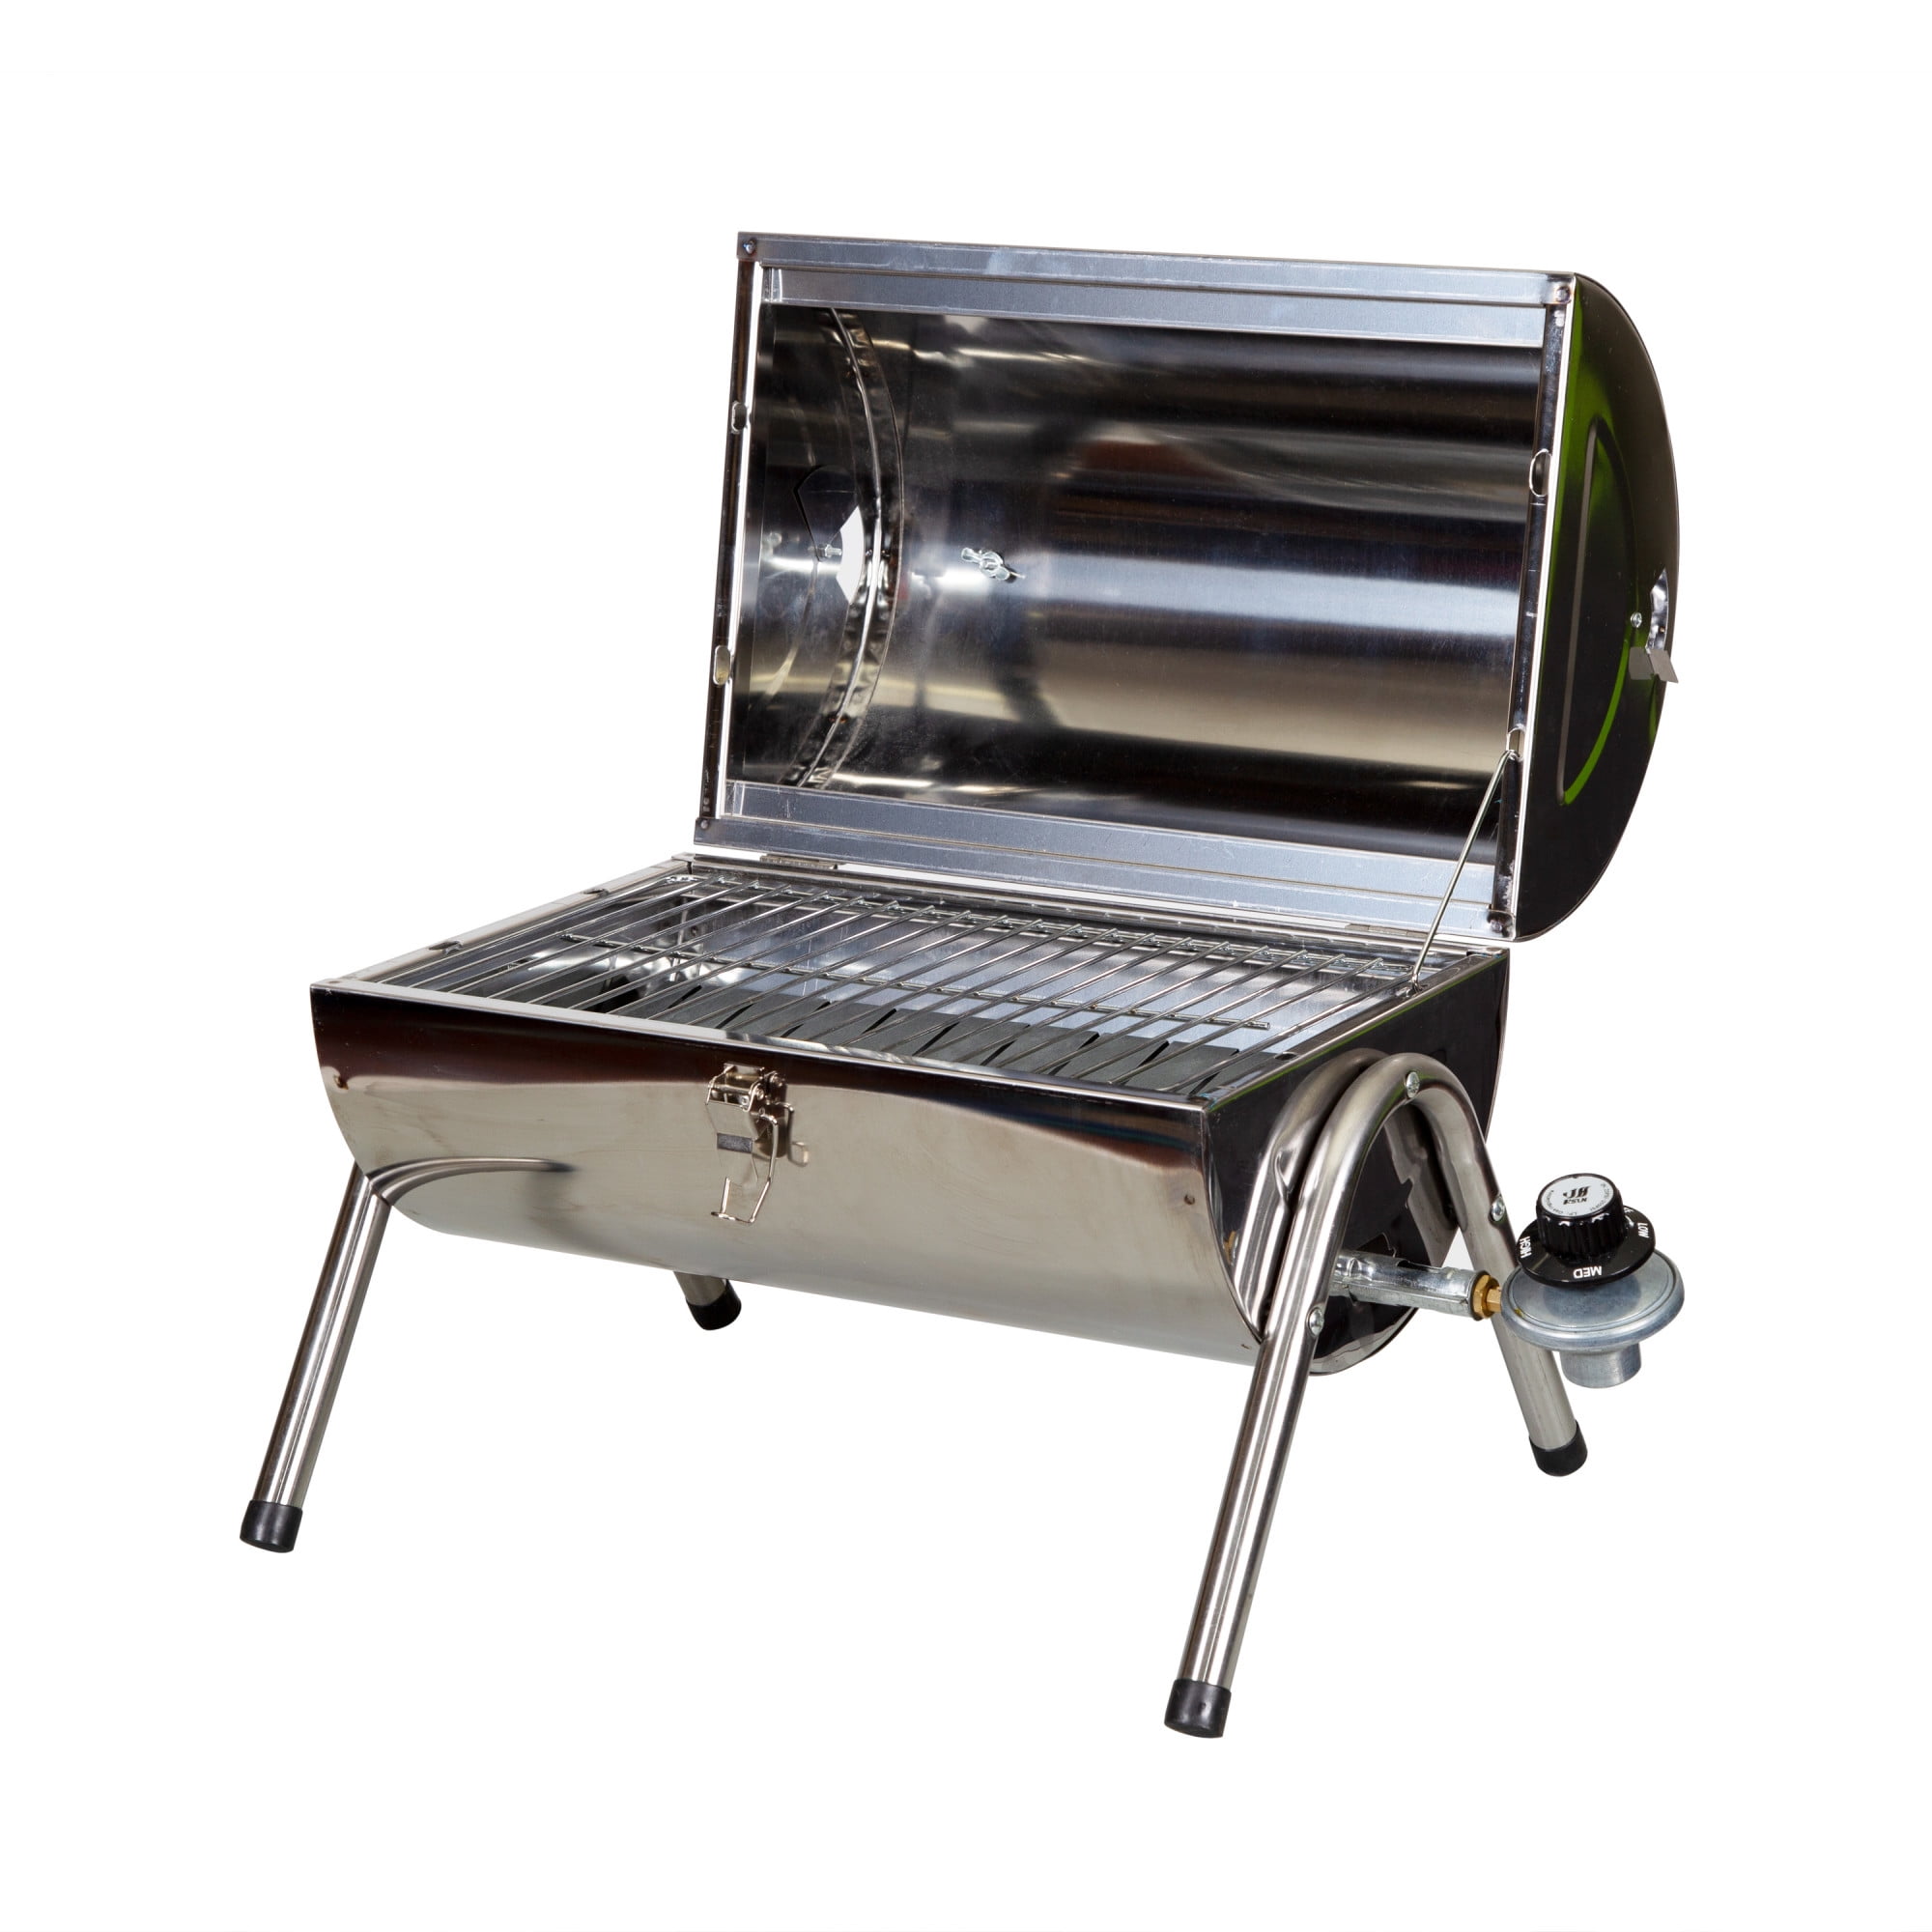 Ontslag hulp Vrijlating Stansport Stainless Steel Gas Barbeque Grill - Walmart.com